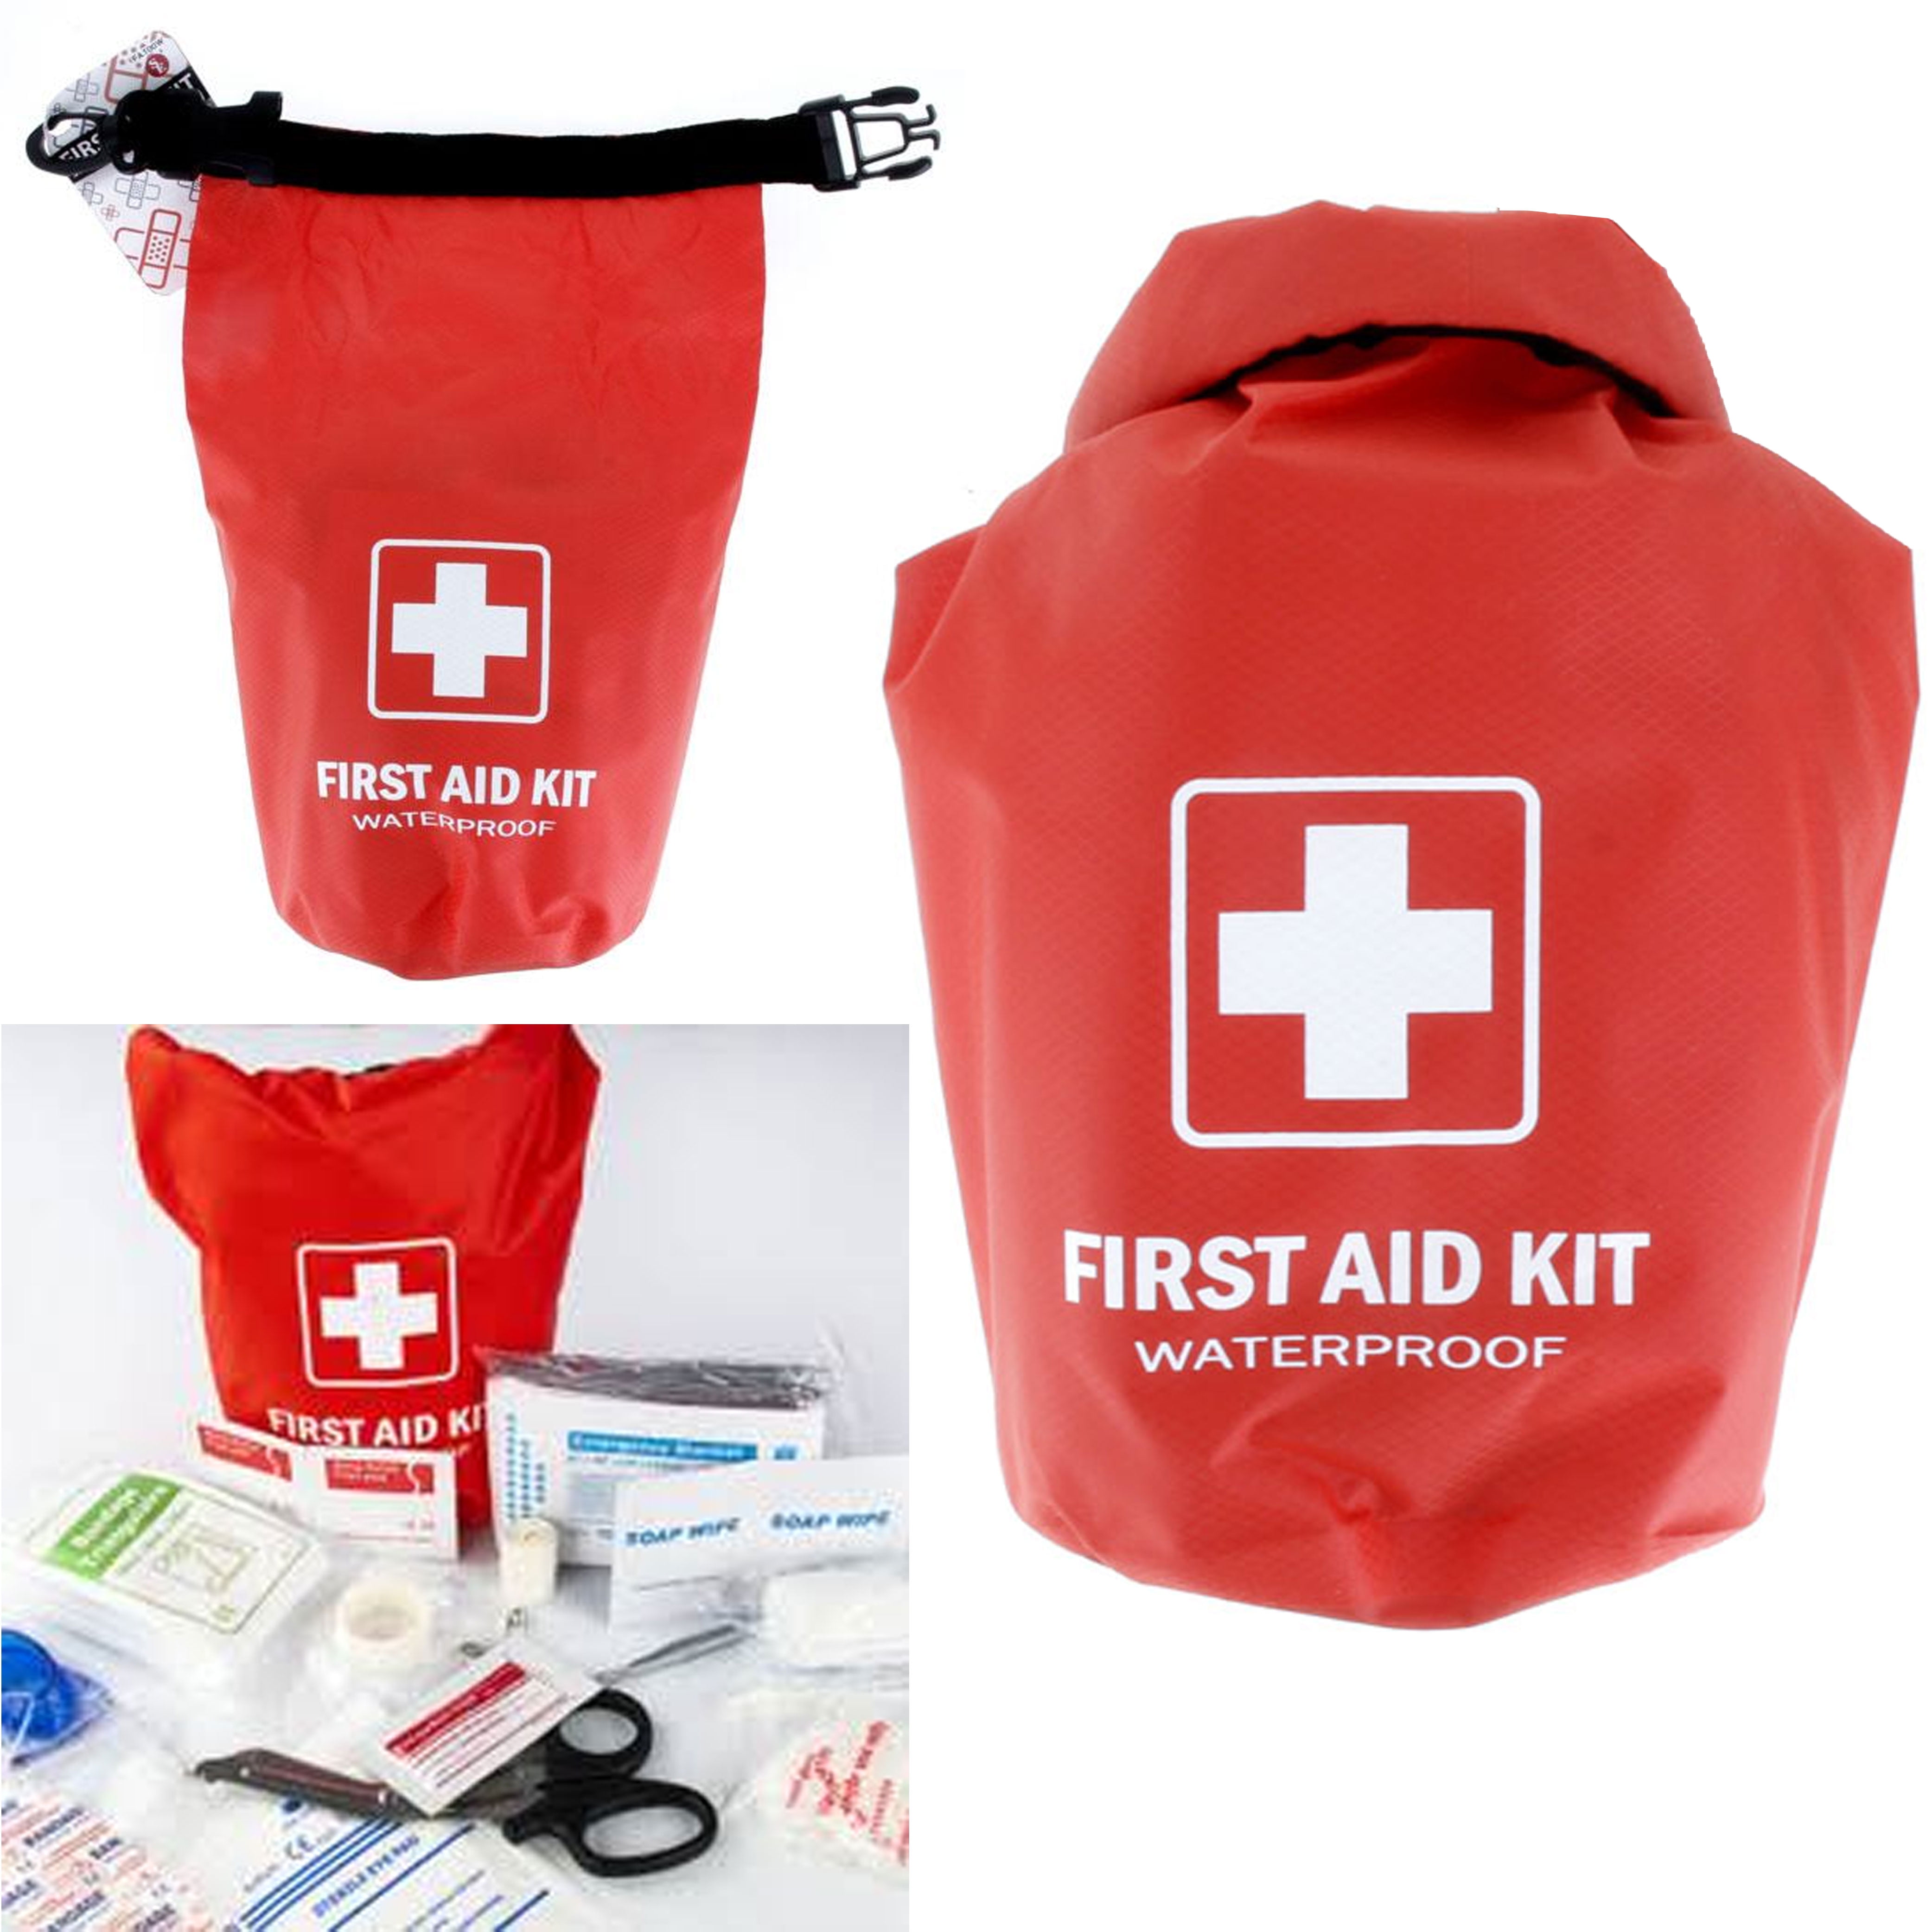 TROIKA ERSTE HILFE SET – FIA16/RD – First aid kit waterproof, roll top  closure – contains: 1 mouth-to-mouth mask – 1 pair of vinyl gloves, 1  emergency